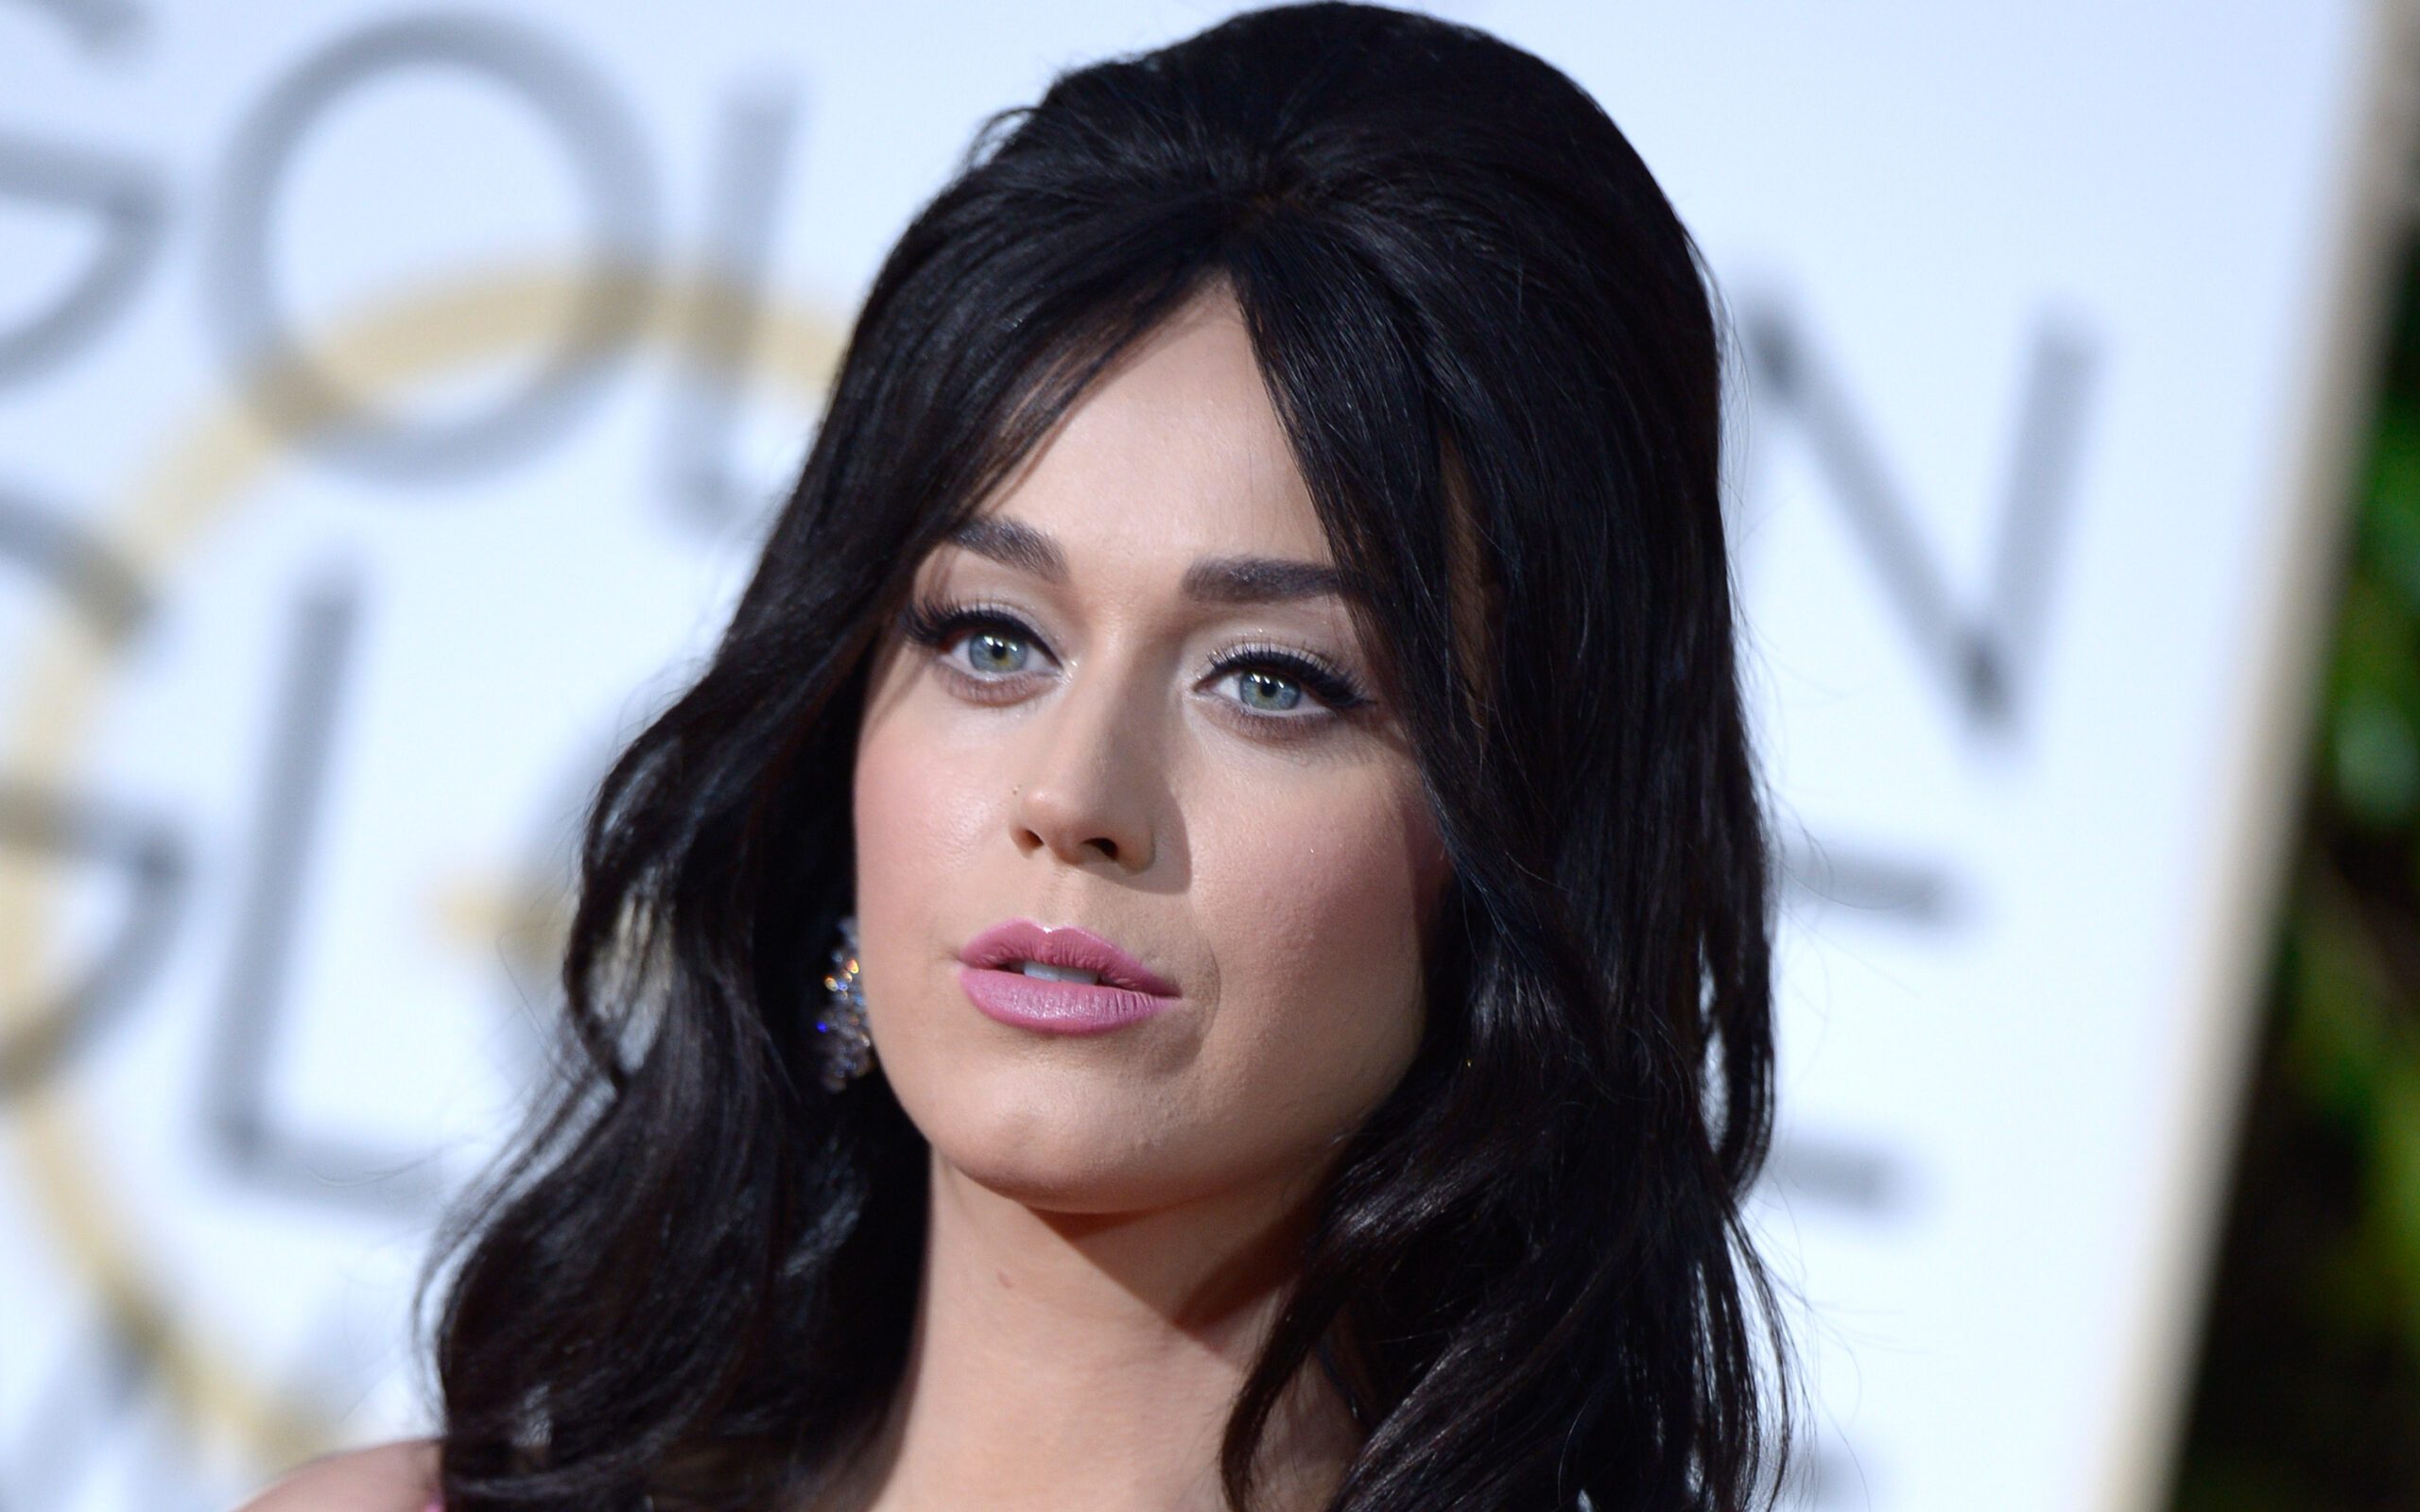 Nuns hit back in battle with Katy Perry over convent